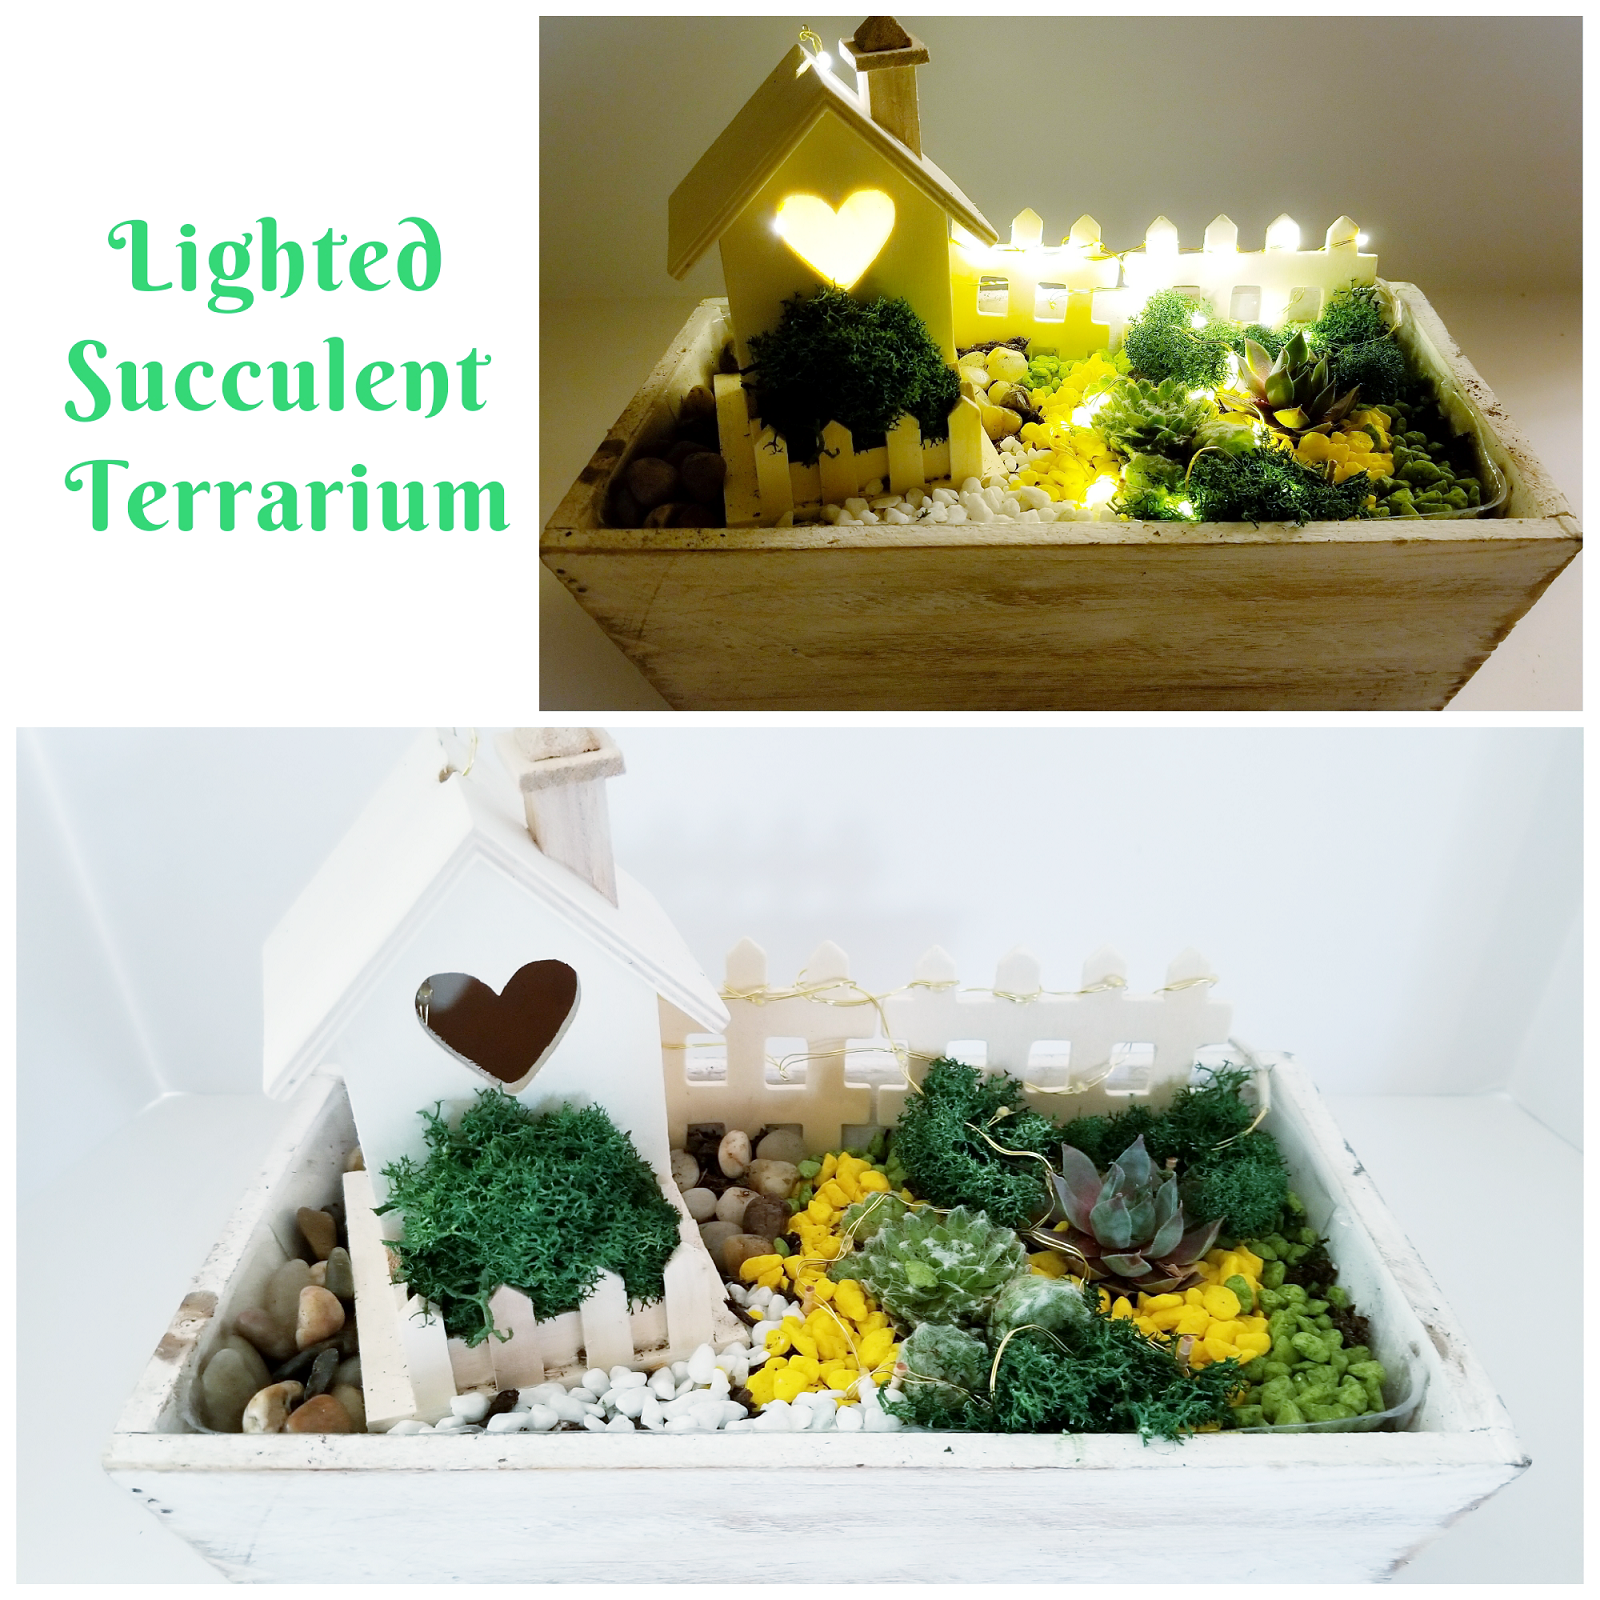 A Lighted Succulent Terrarium Fields of Gold plant nite project by Yaymaker